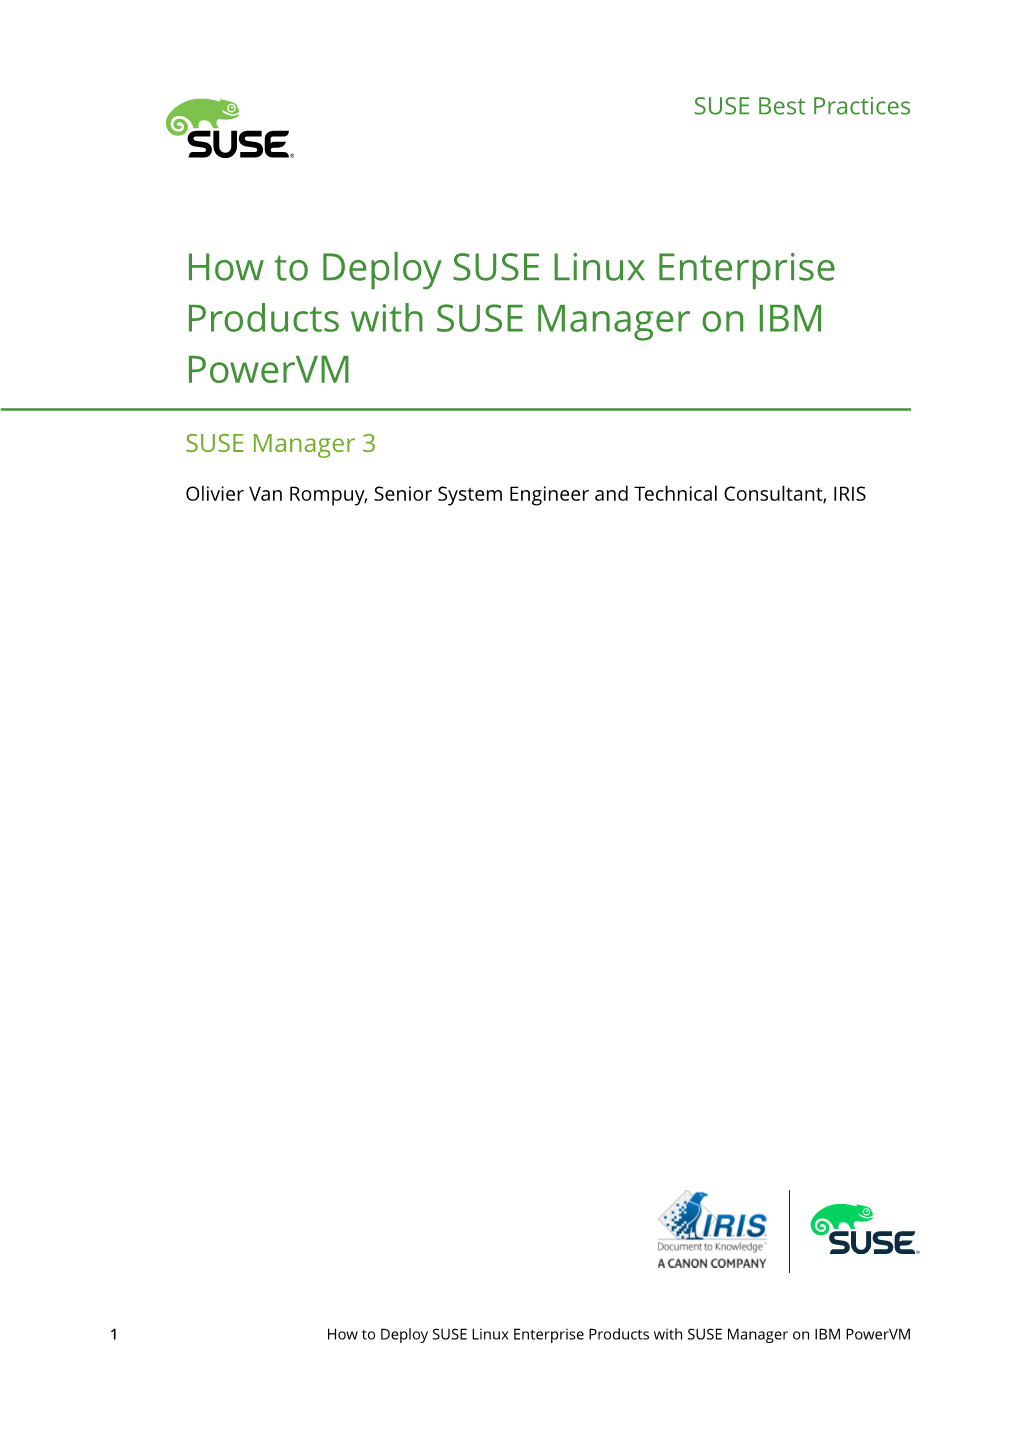 How to Deploy SUSE Linux Enterprise Products with SUSE Manager on IBM Powervm